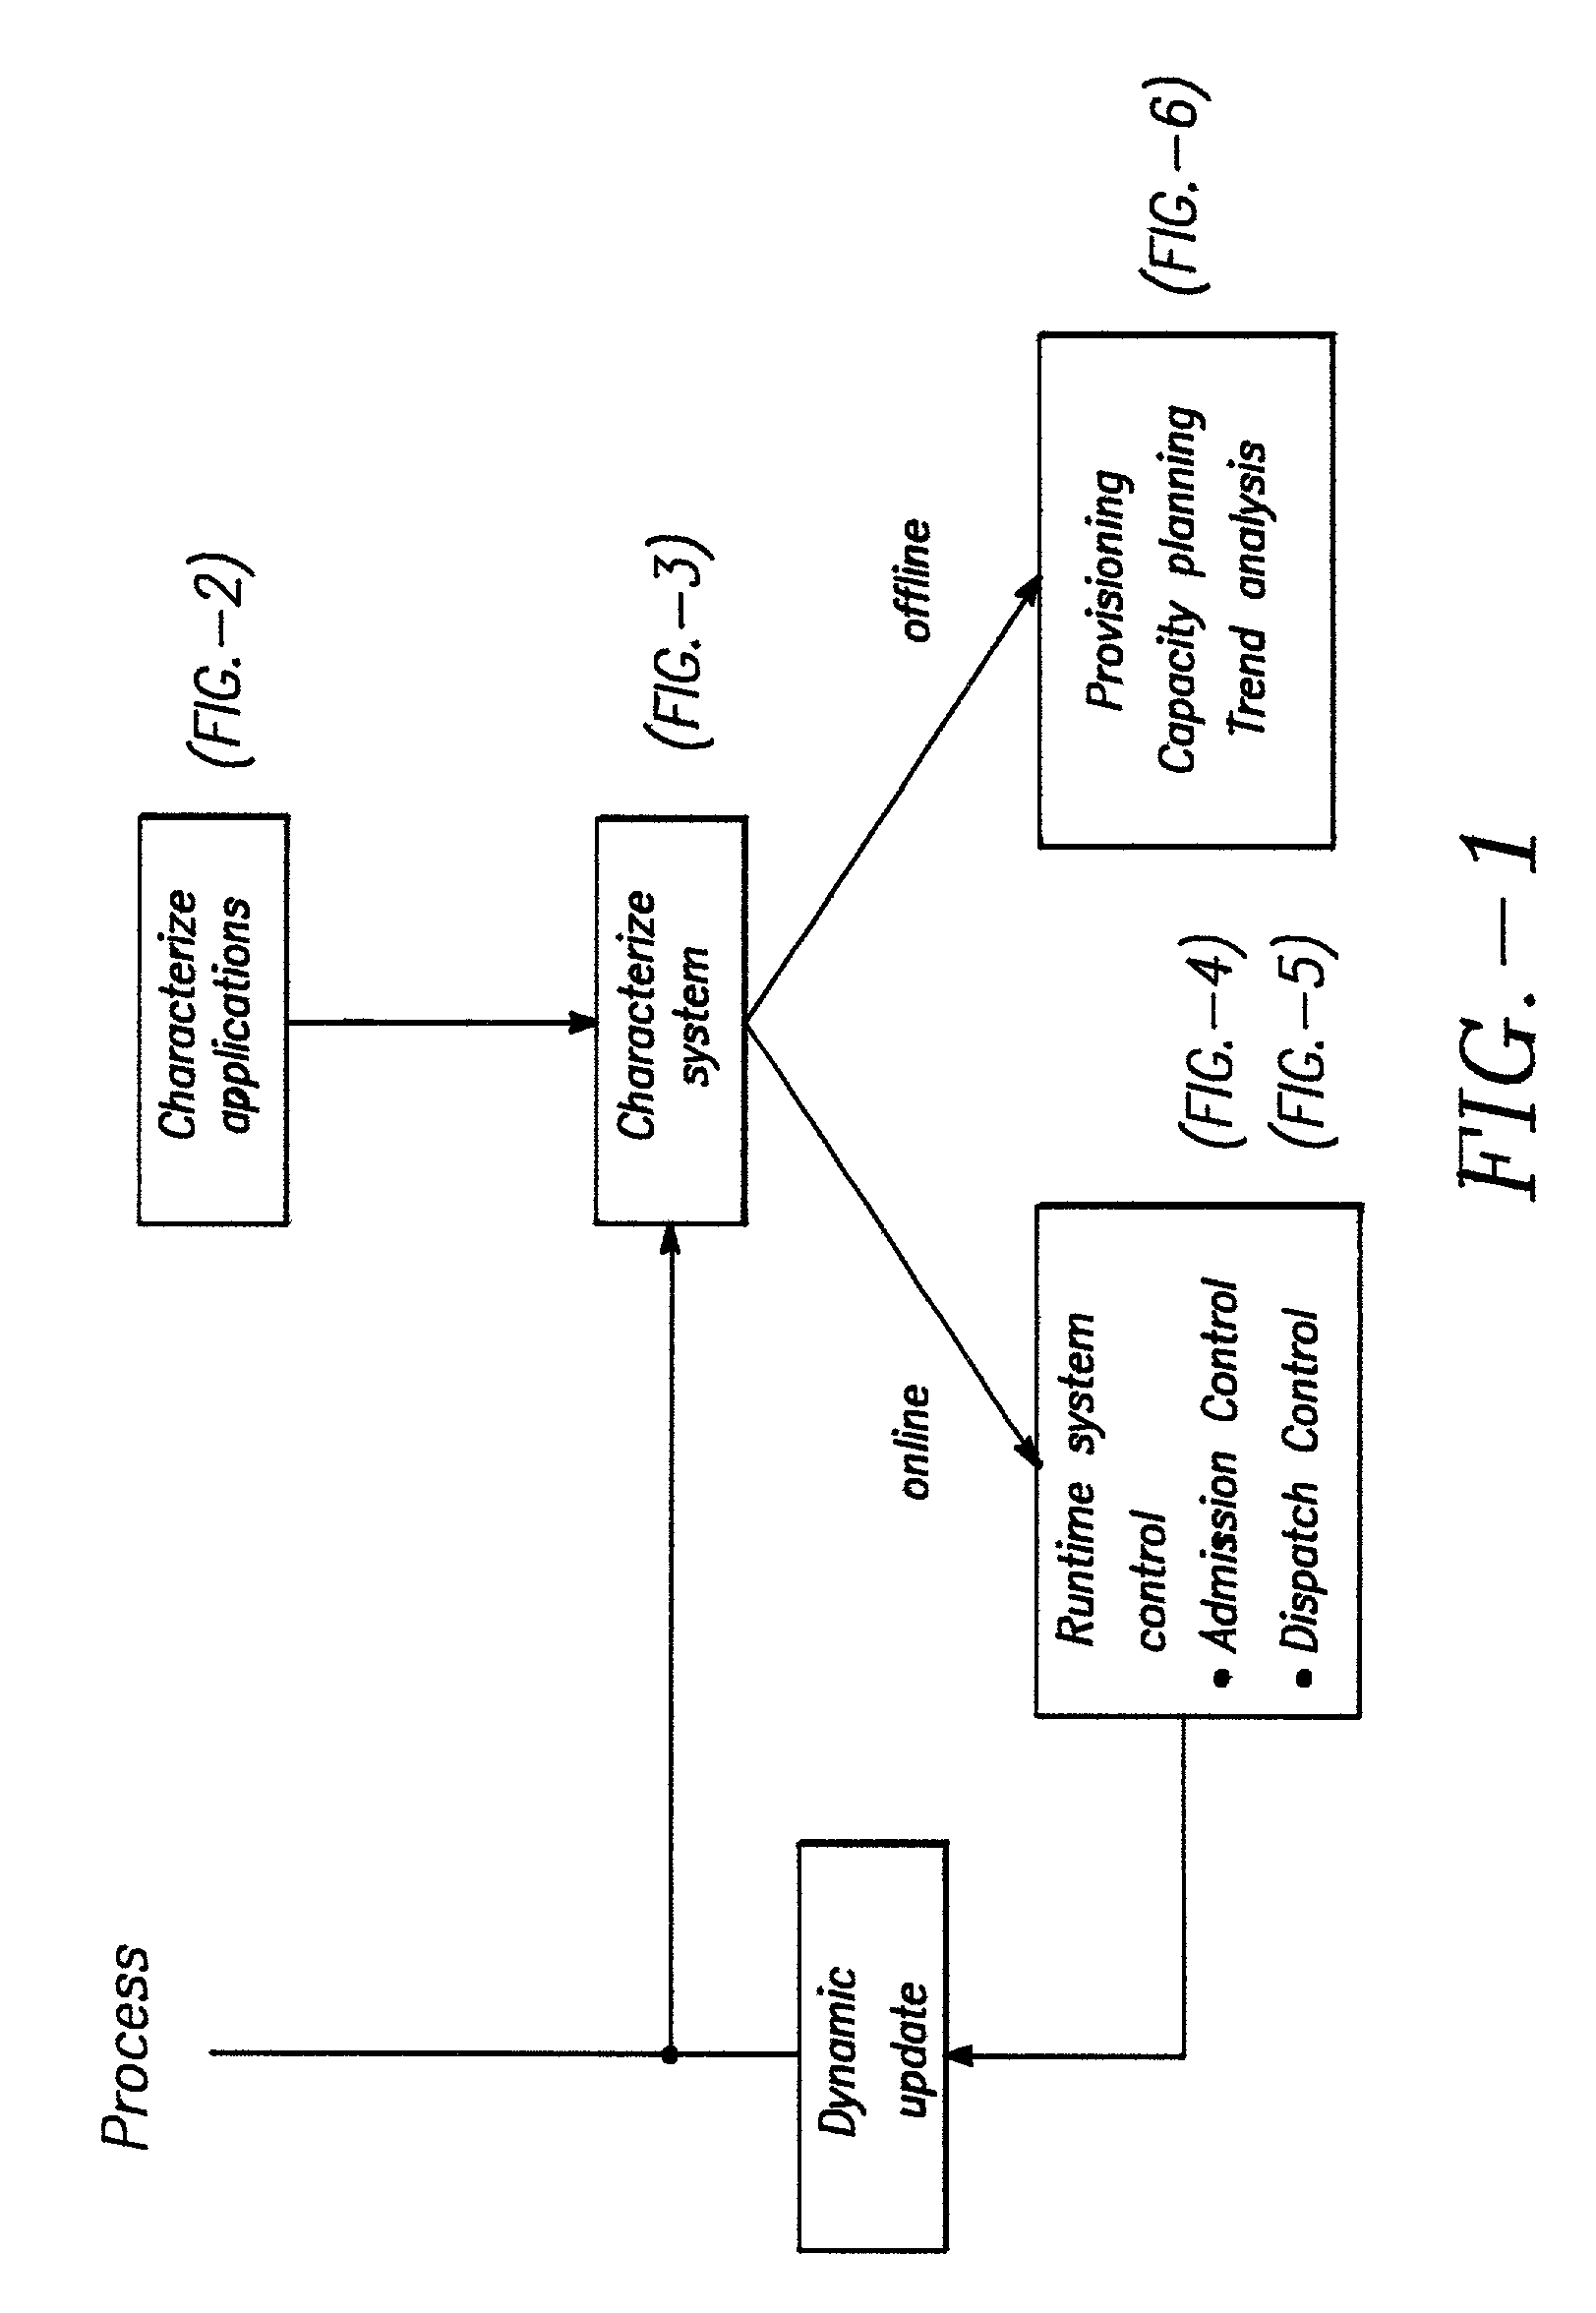 System and method for modeling information system capacity and accepting sessions in an information system